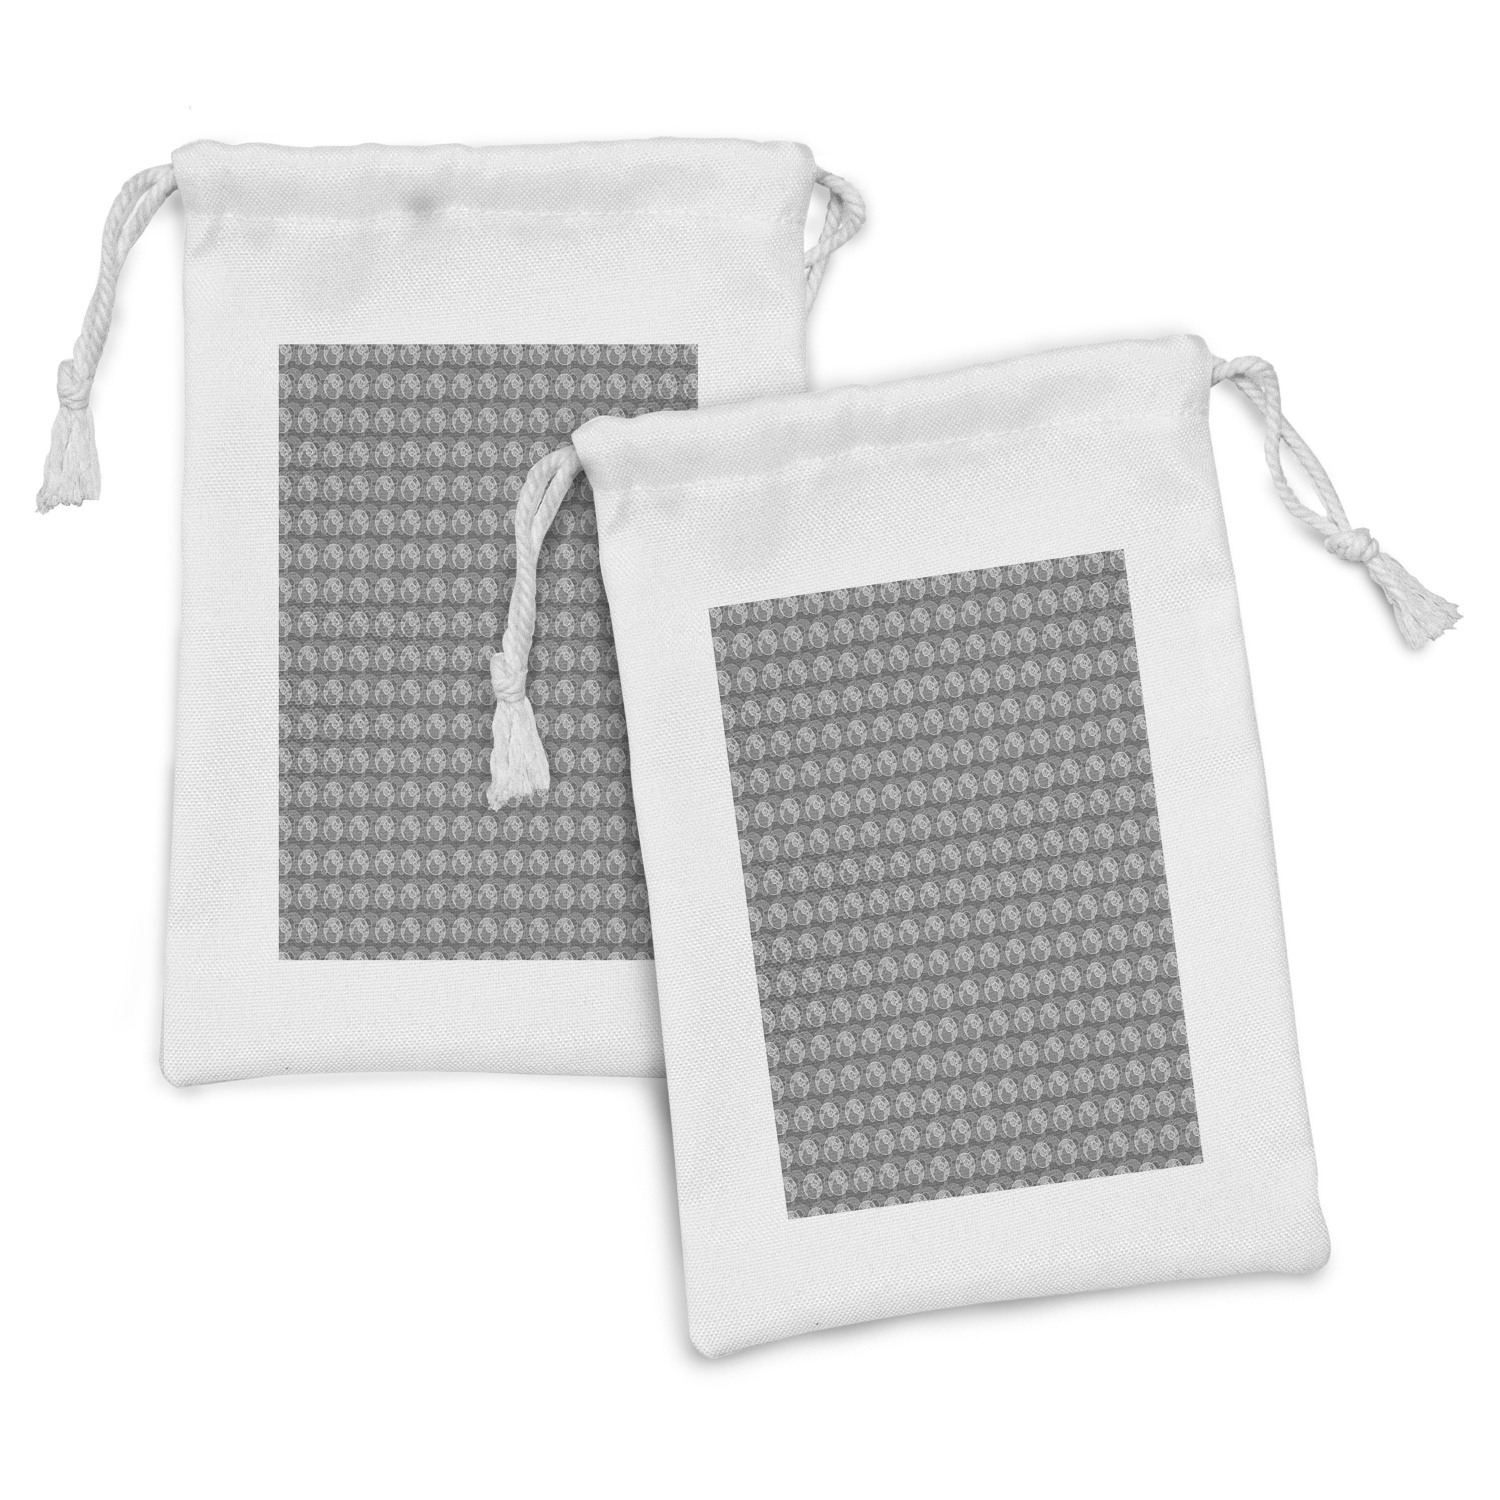 Geometric Fabric Pouch Set of 2, Greyscale Rings Overlapping Ovals Interlocked Ellipses Retro Mosaic Modern Graphic, Small Drawstring Bag for Toiletries Masks and Favors, 9" x 6", Grey, by Ambesonne - image 1 of 2